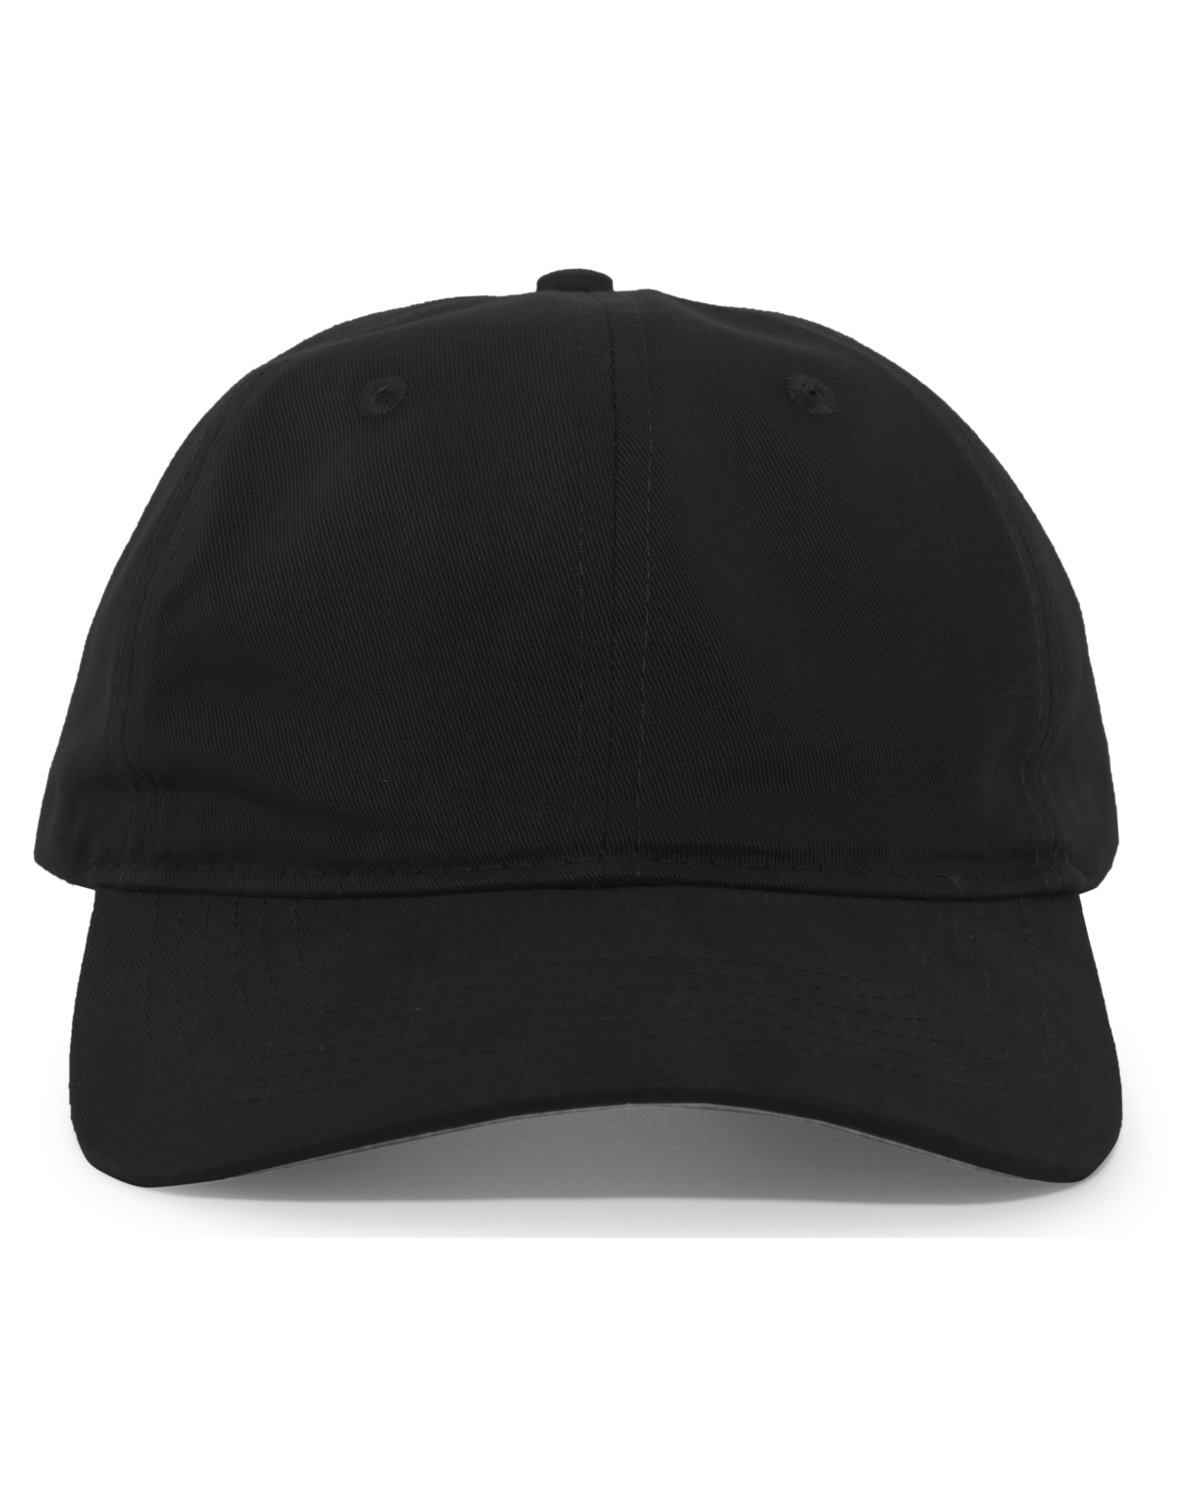 Brushed Cotton Twill Cap-Pacific Headwear